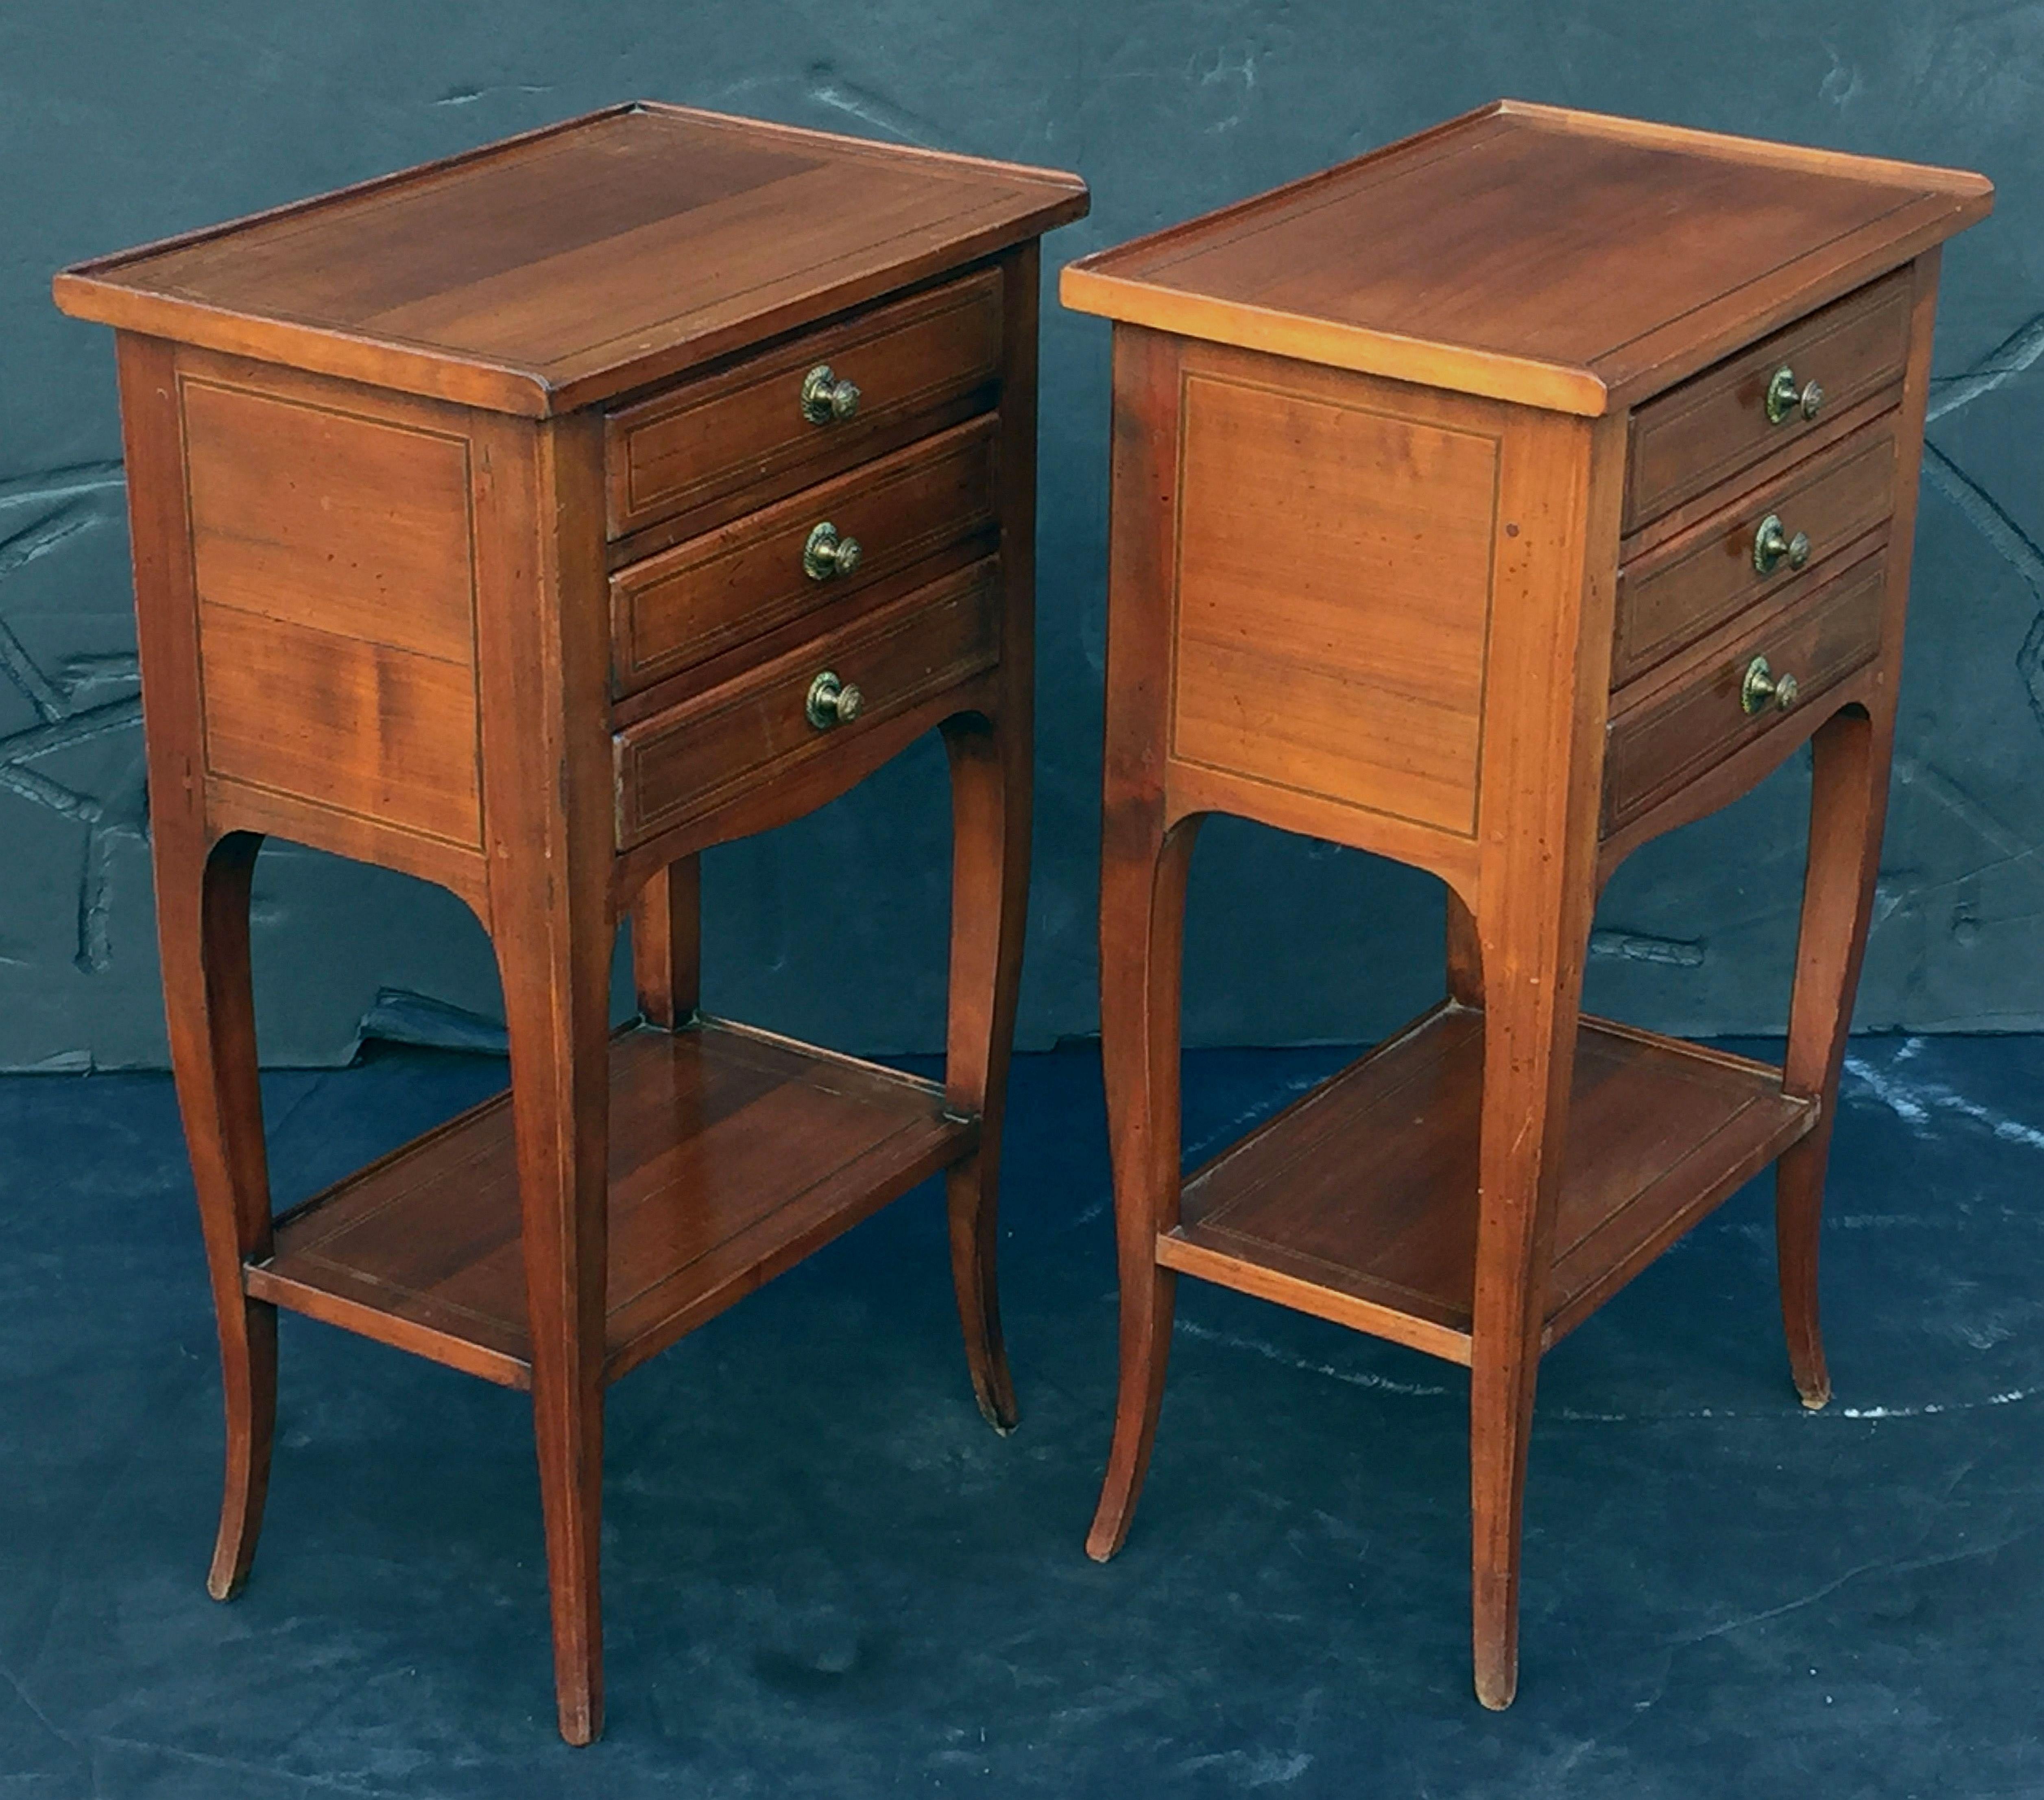 A pair of fine French nightstands or bedside end tables of chestnut - each featuring a rectangular top with gallery over a shaped frieze with three drawers, set upon a turned cabriole leg support with shelf.

Dimensions: H 27 inches x W 16 1/4